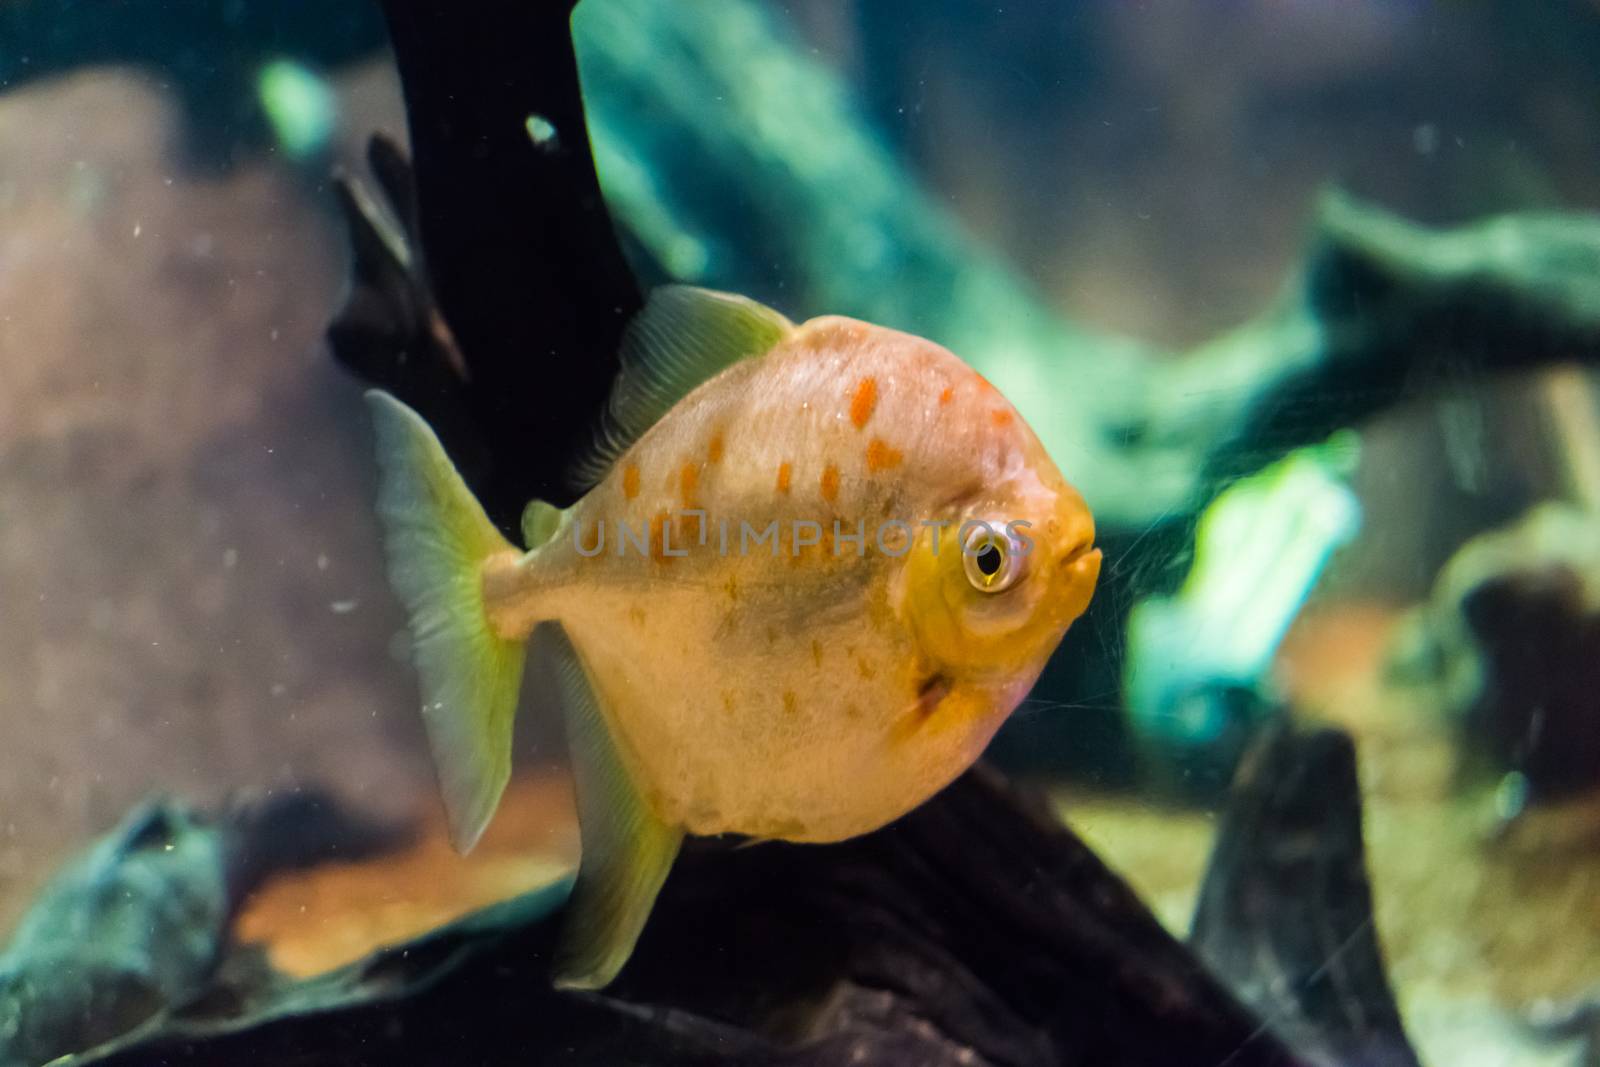 Redhook myleus a silver dollar fish species with shiny and glittery scales and orange spots tropical aquarium fish pet by charlottebleijenberg